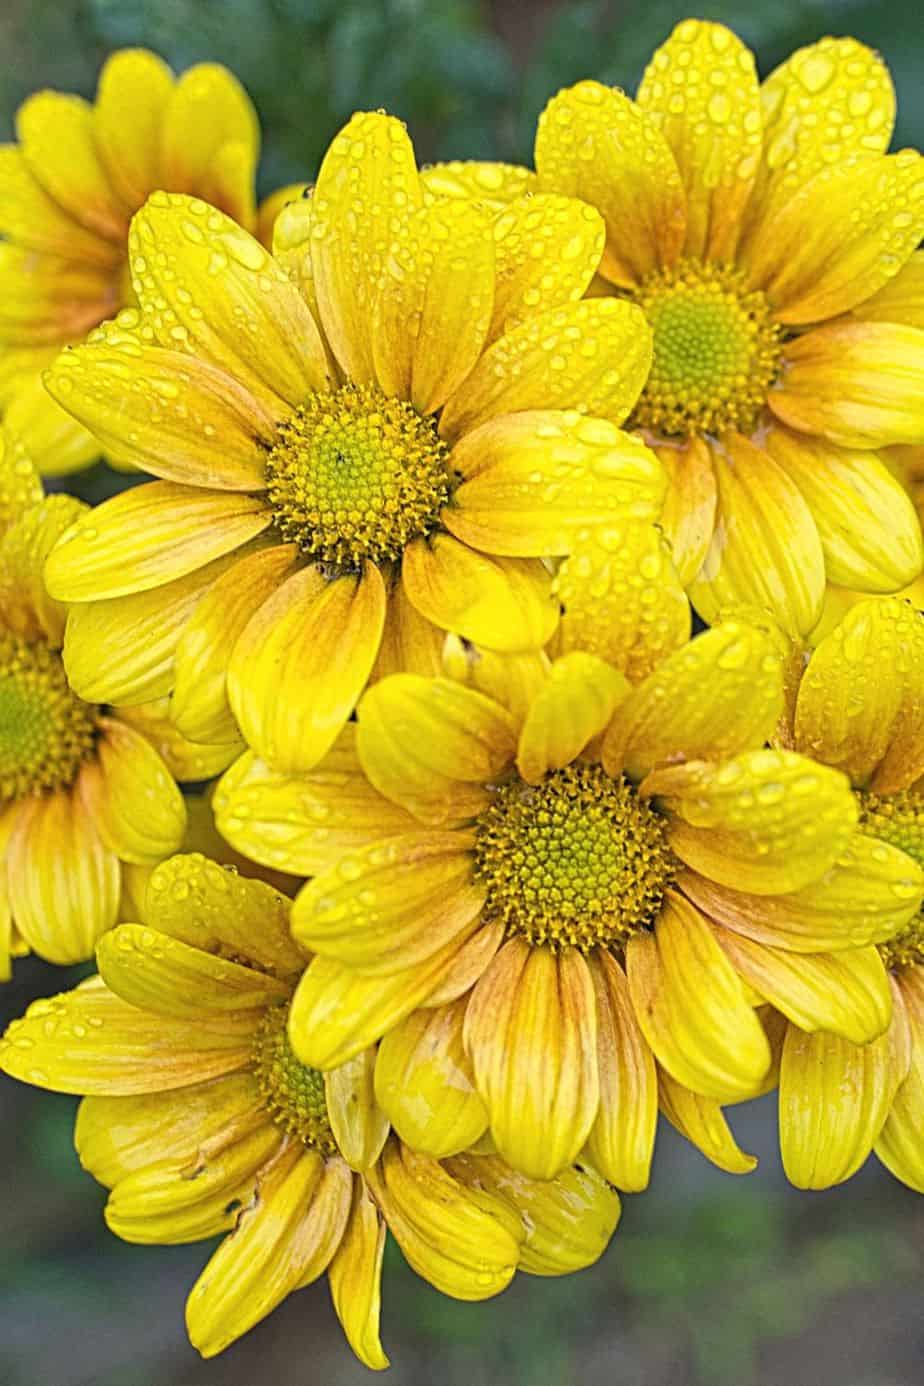 Chrysanthemum, aka mums, is another beautiful plant to add to your southeast-facing garden